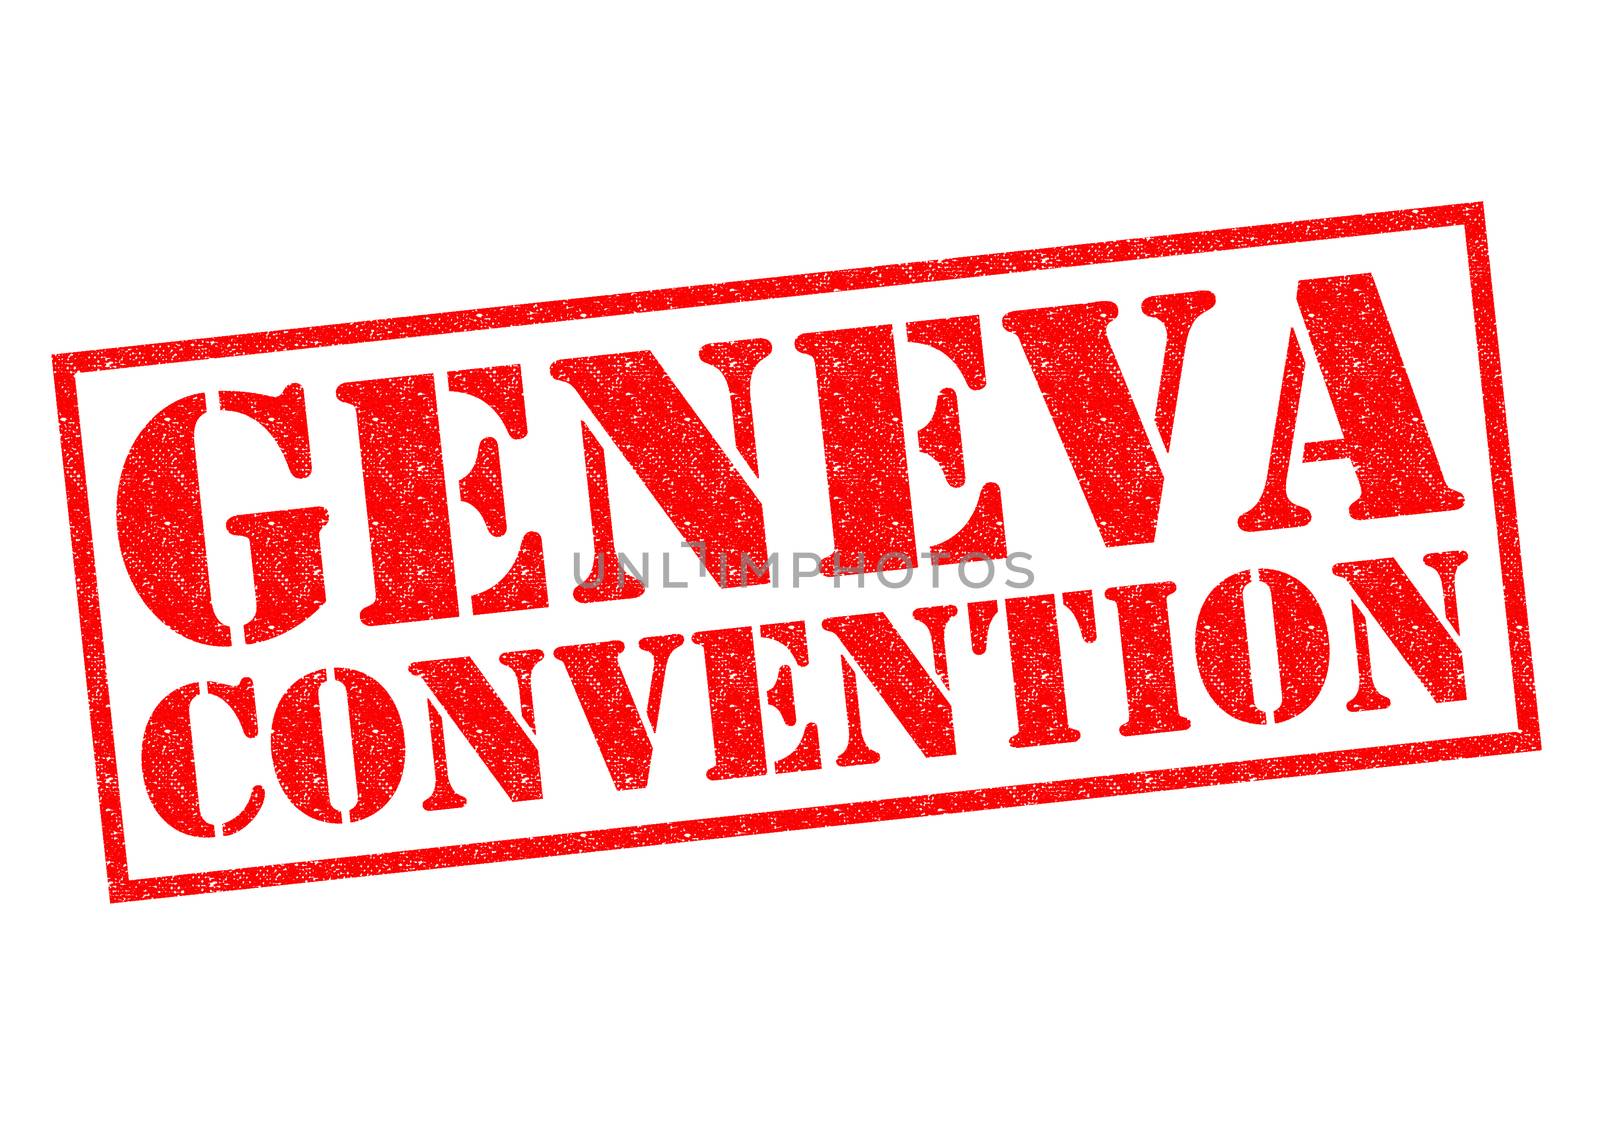 GENEVA CONVENTION red Rubber Stamp over a white background.